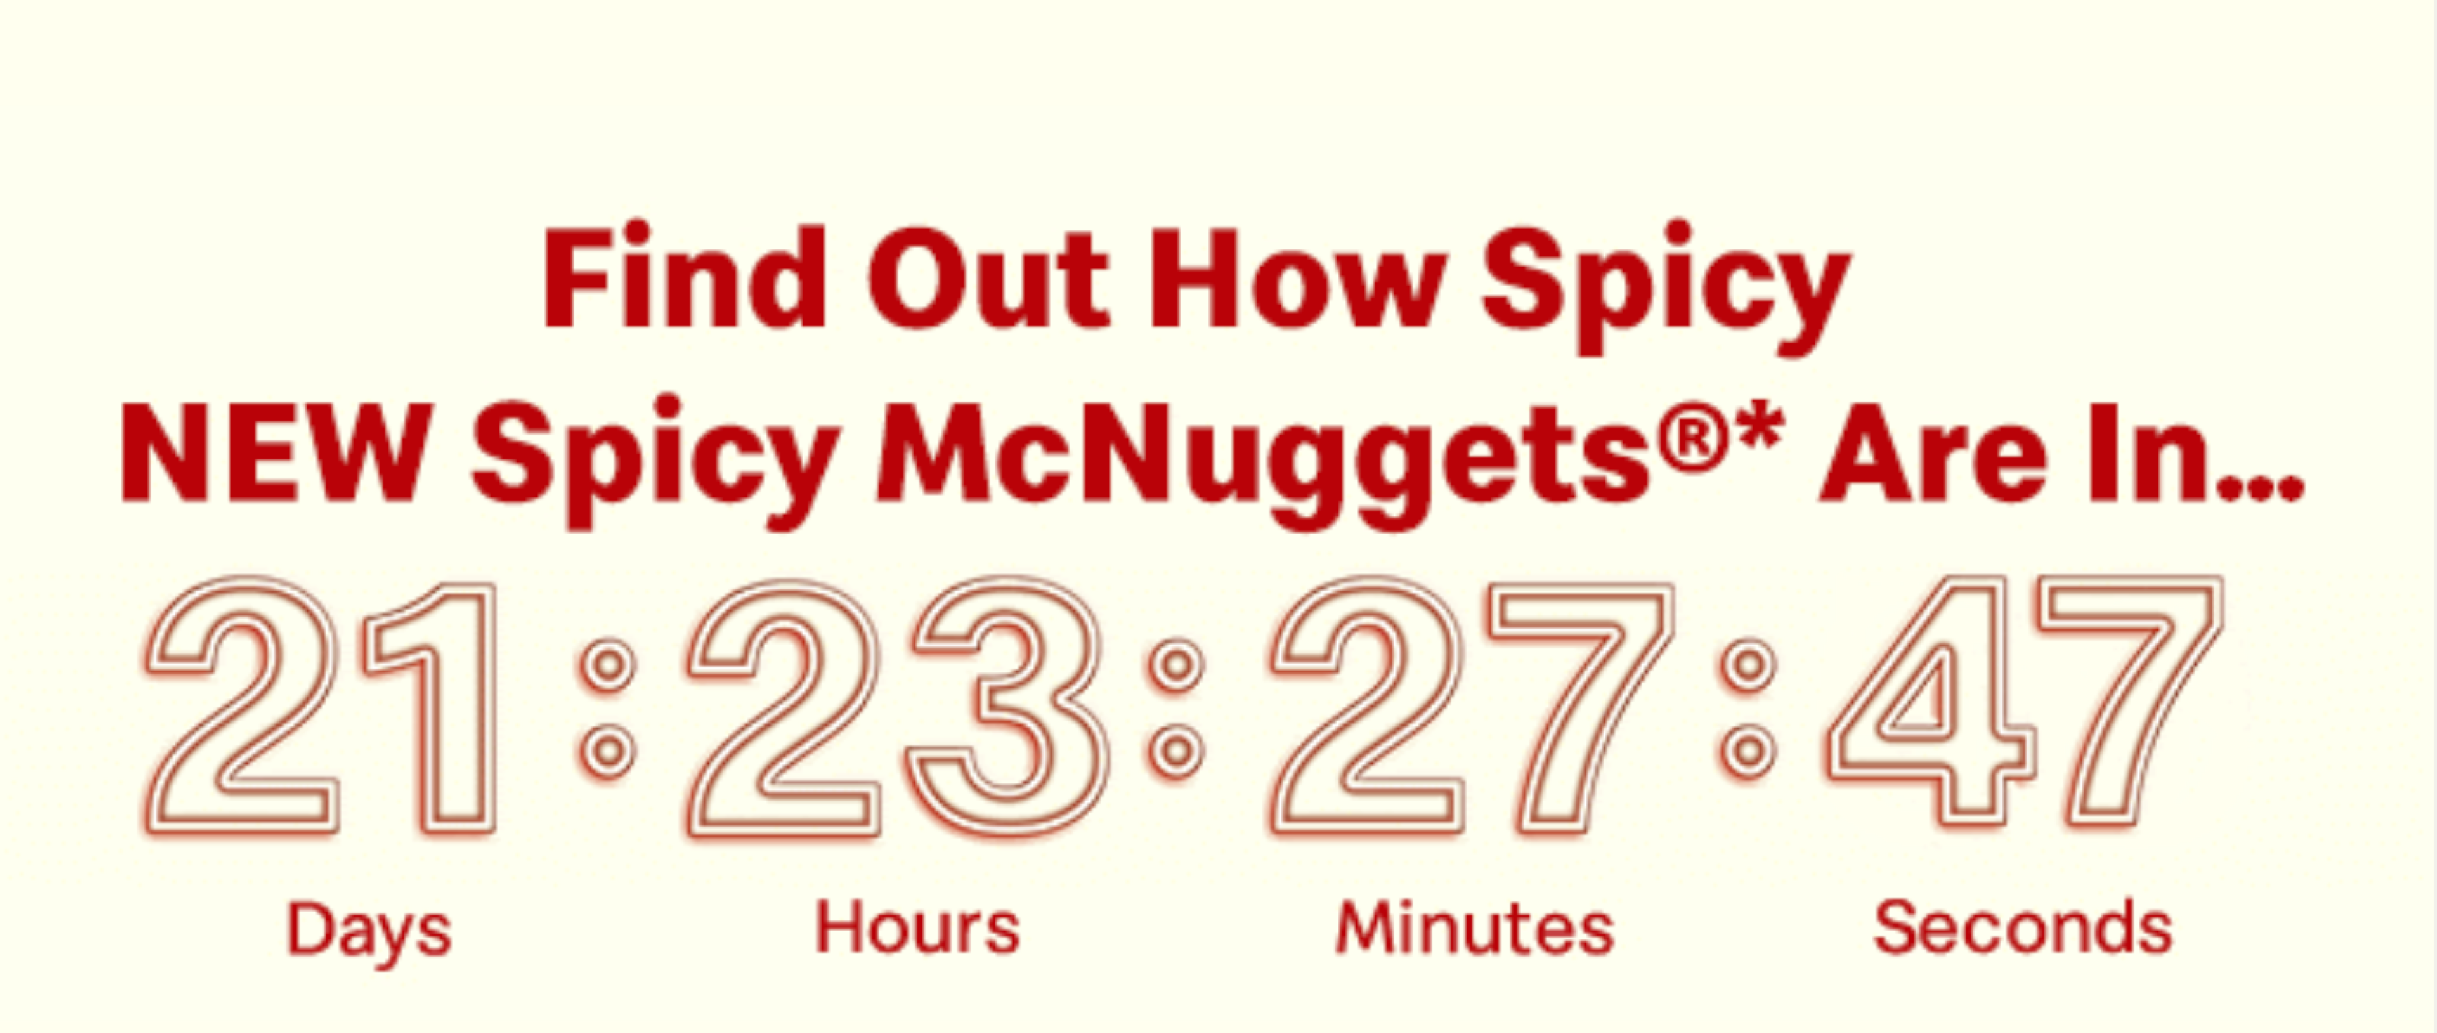 McDonalds US Spicy Nuggets Loss Aversion